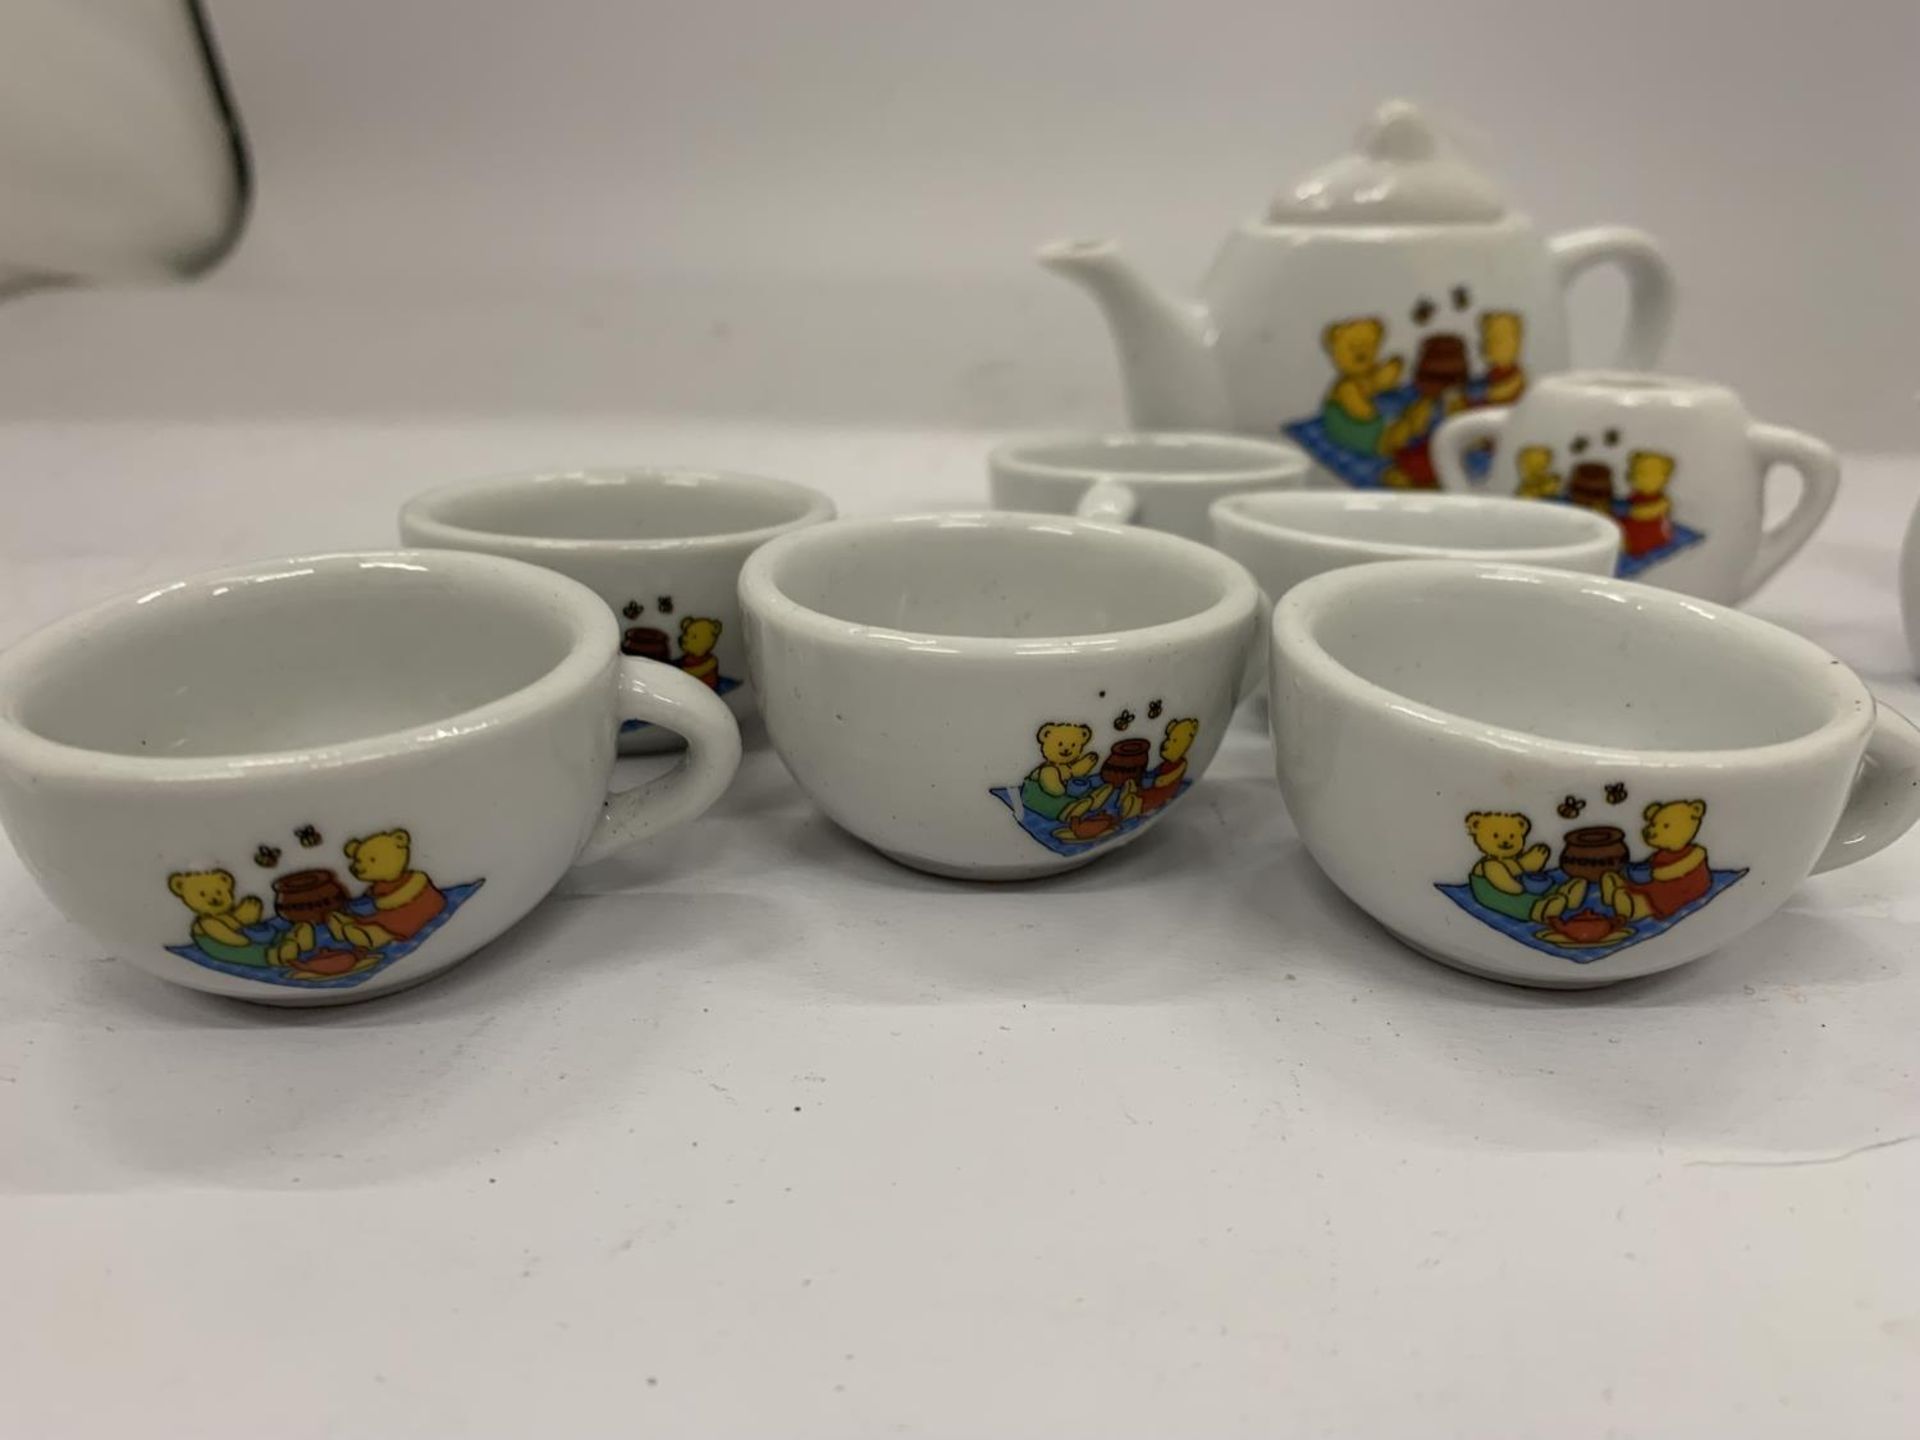 A MINIATURE CHILD'S POTTERY TEASET TO INCLUDE TEAPOT, JUGS, CUPS, ETC WITH A TEDDY BEARS PICNIC - Image 10 of 10